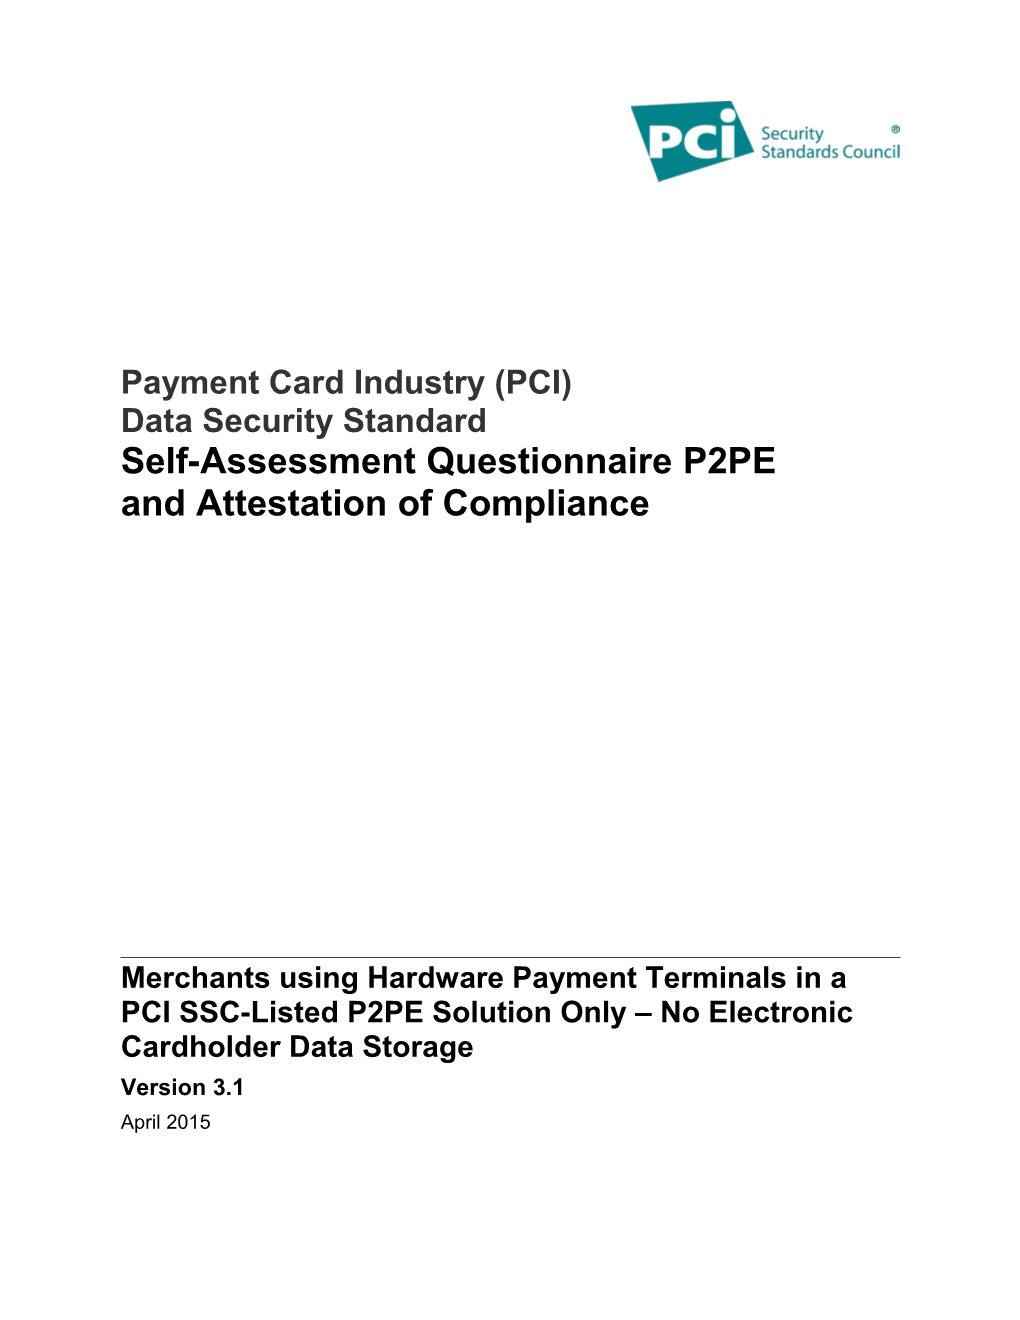 Payment Card Industry (PCI) Data Security Standard Self-Assessment Questionnaire P2PE